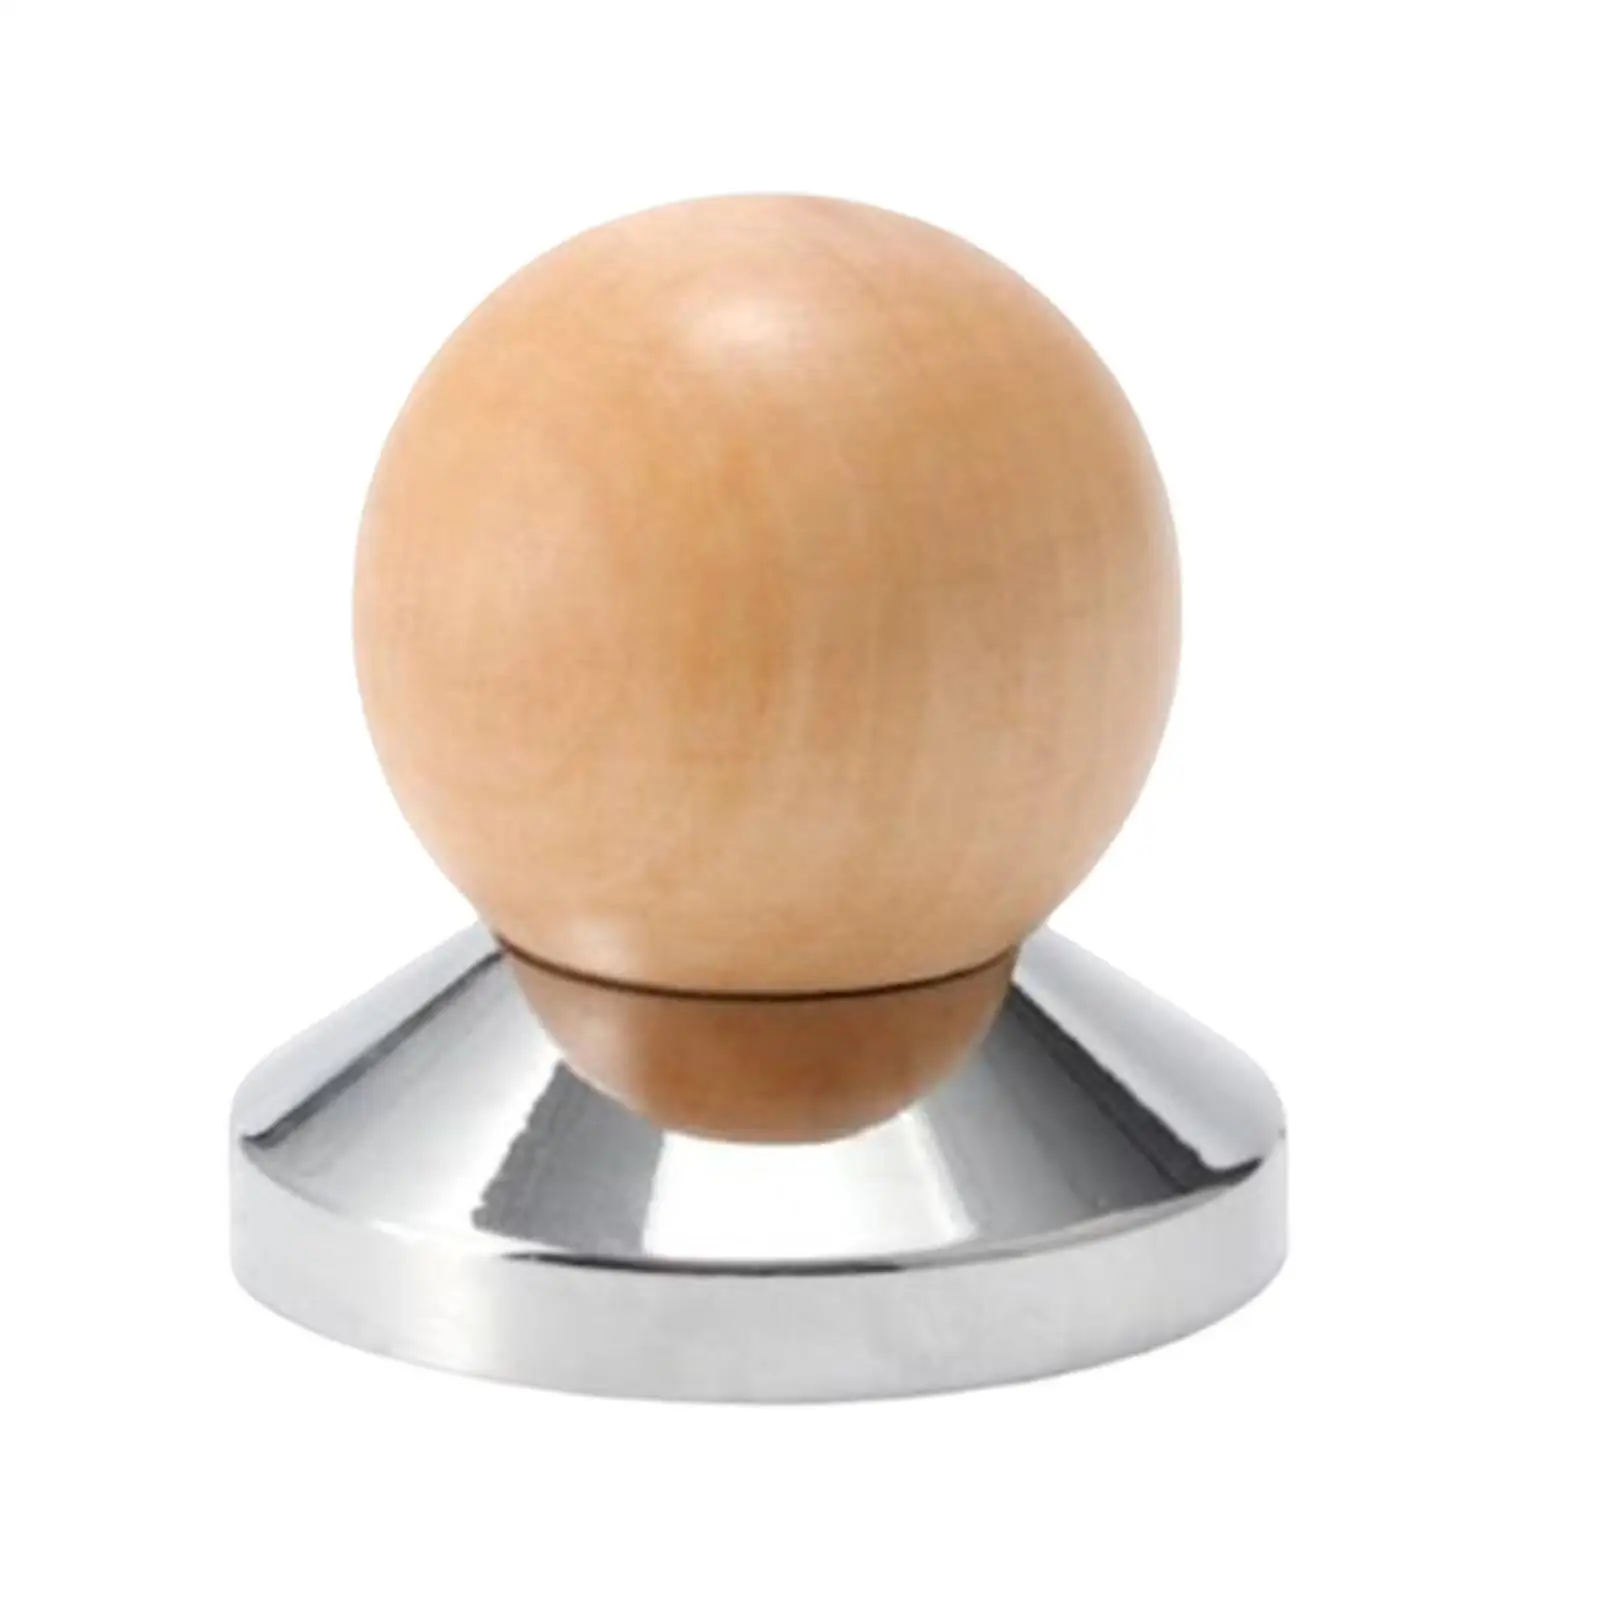 Coffee Tamper Refillable Accessories Reusable Espresso Distributor Stainless Steel Base Distributor for Kitchen Gadgets